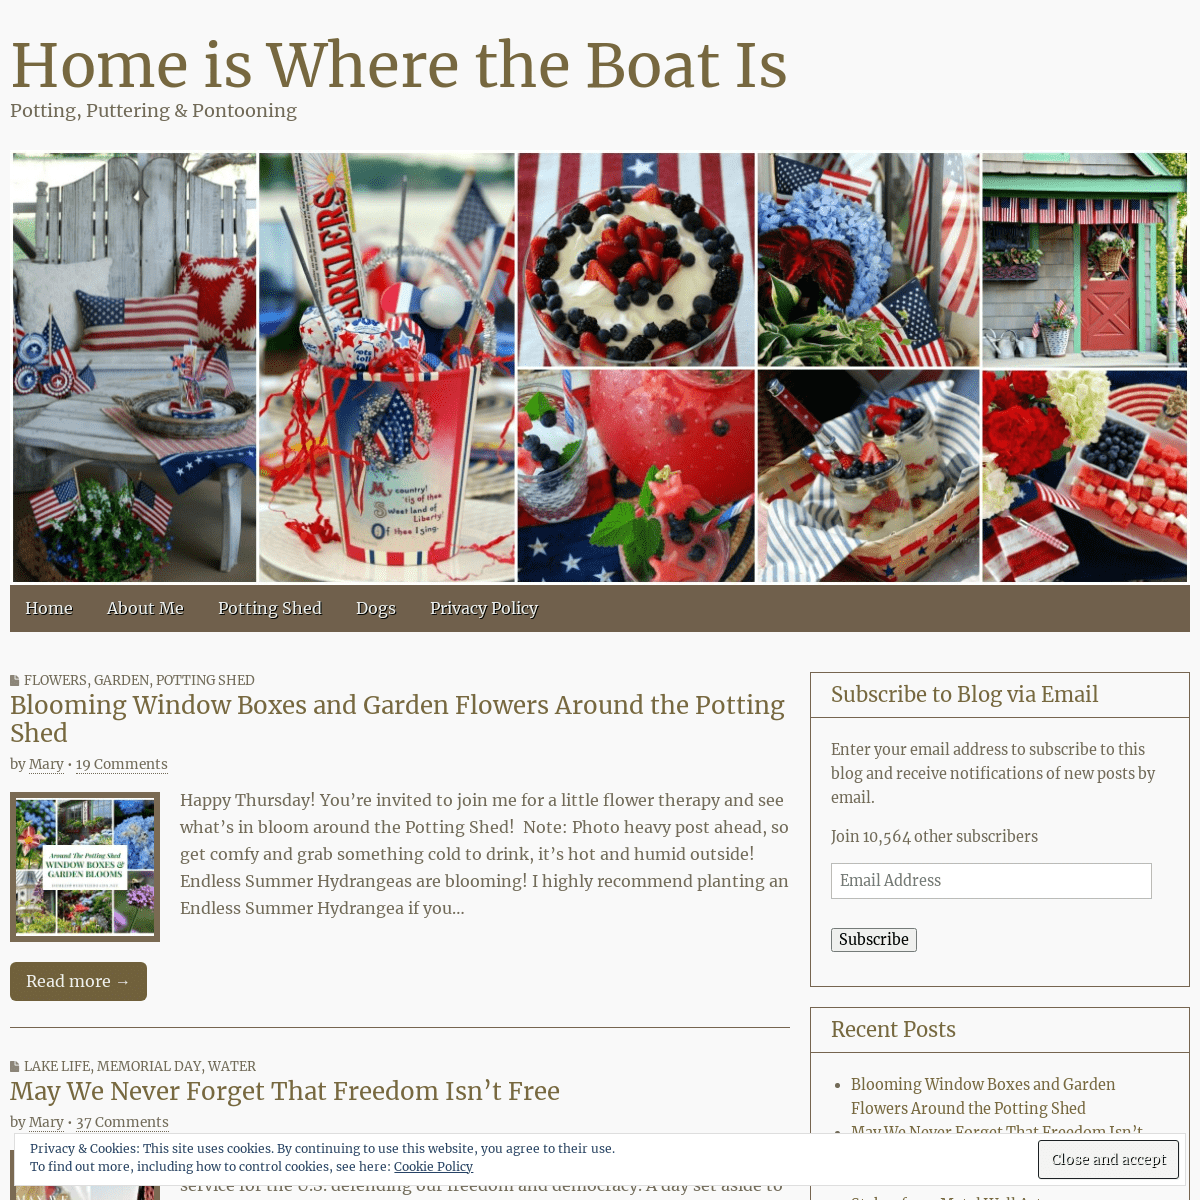 A complete backup of https://homeiswheretheboatis.net